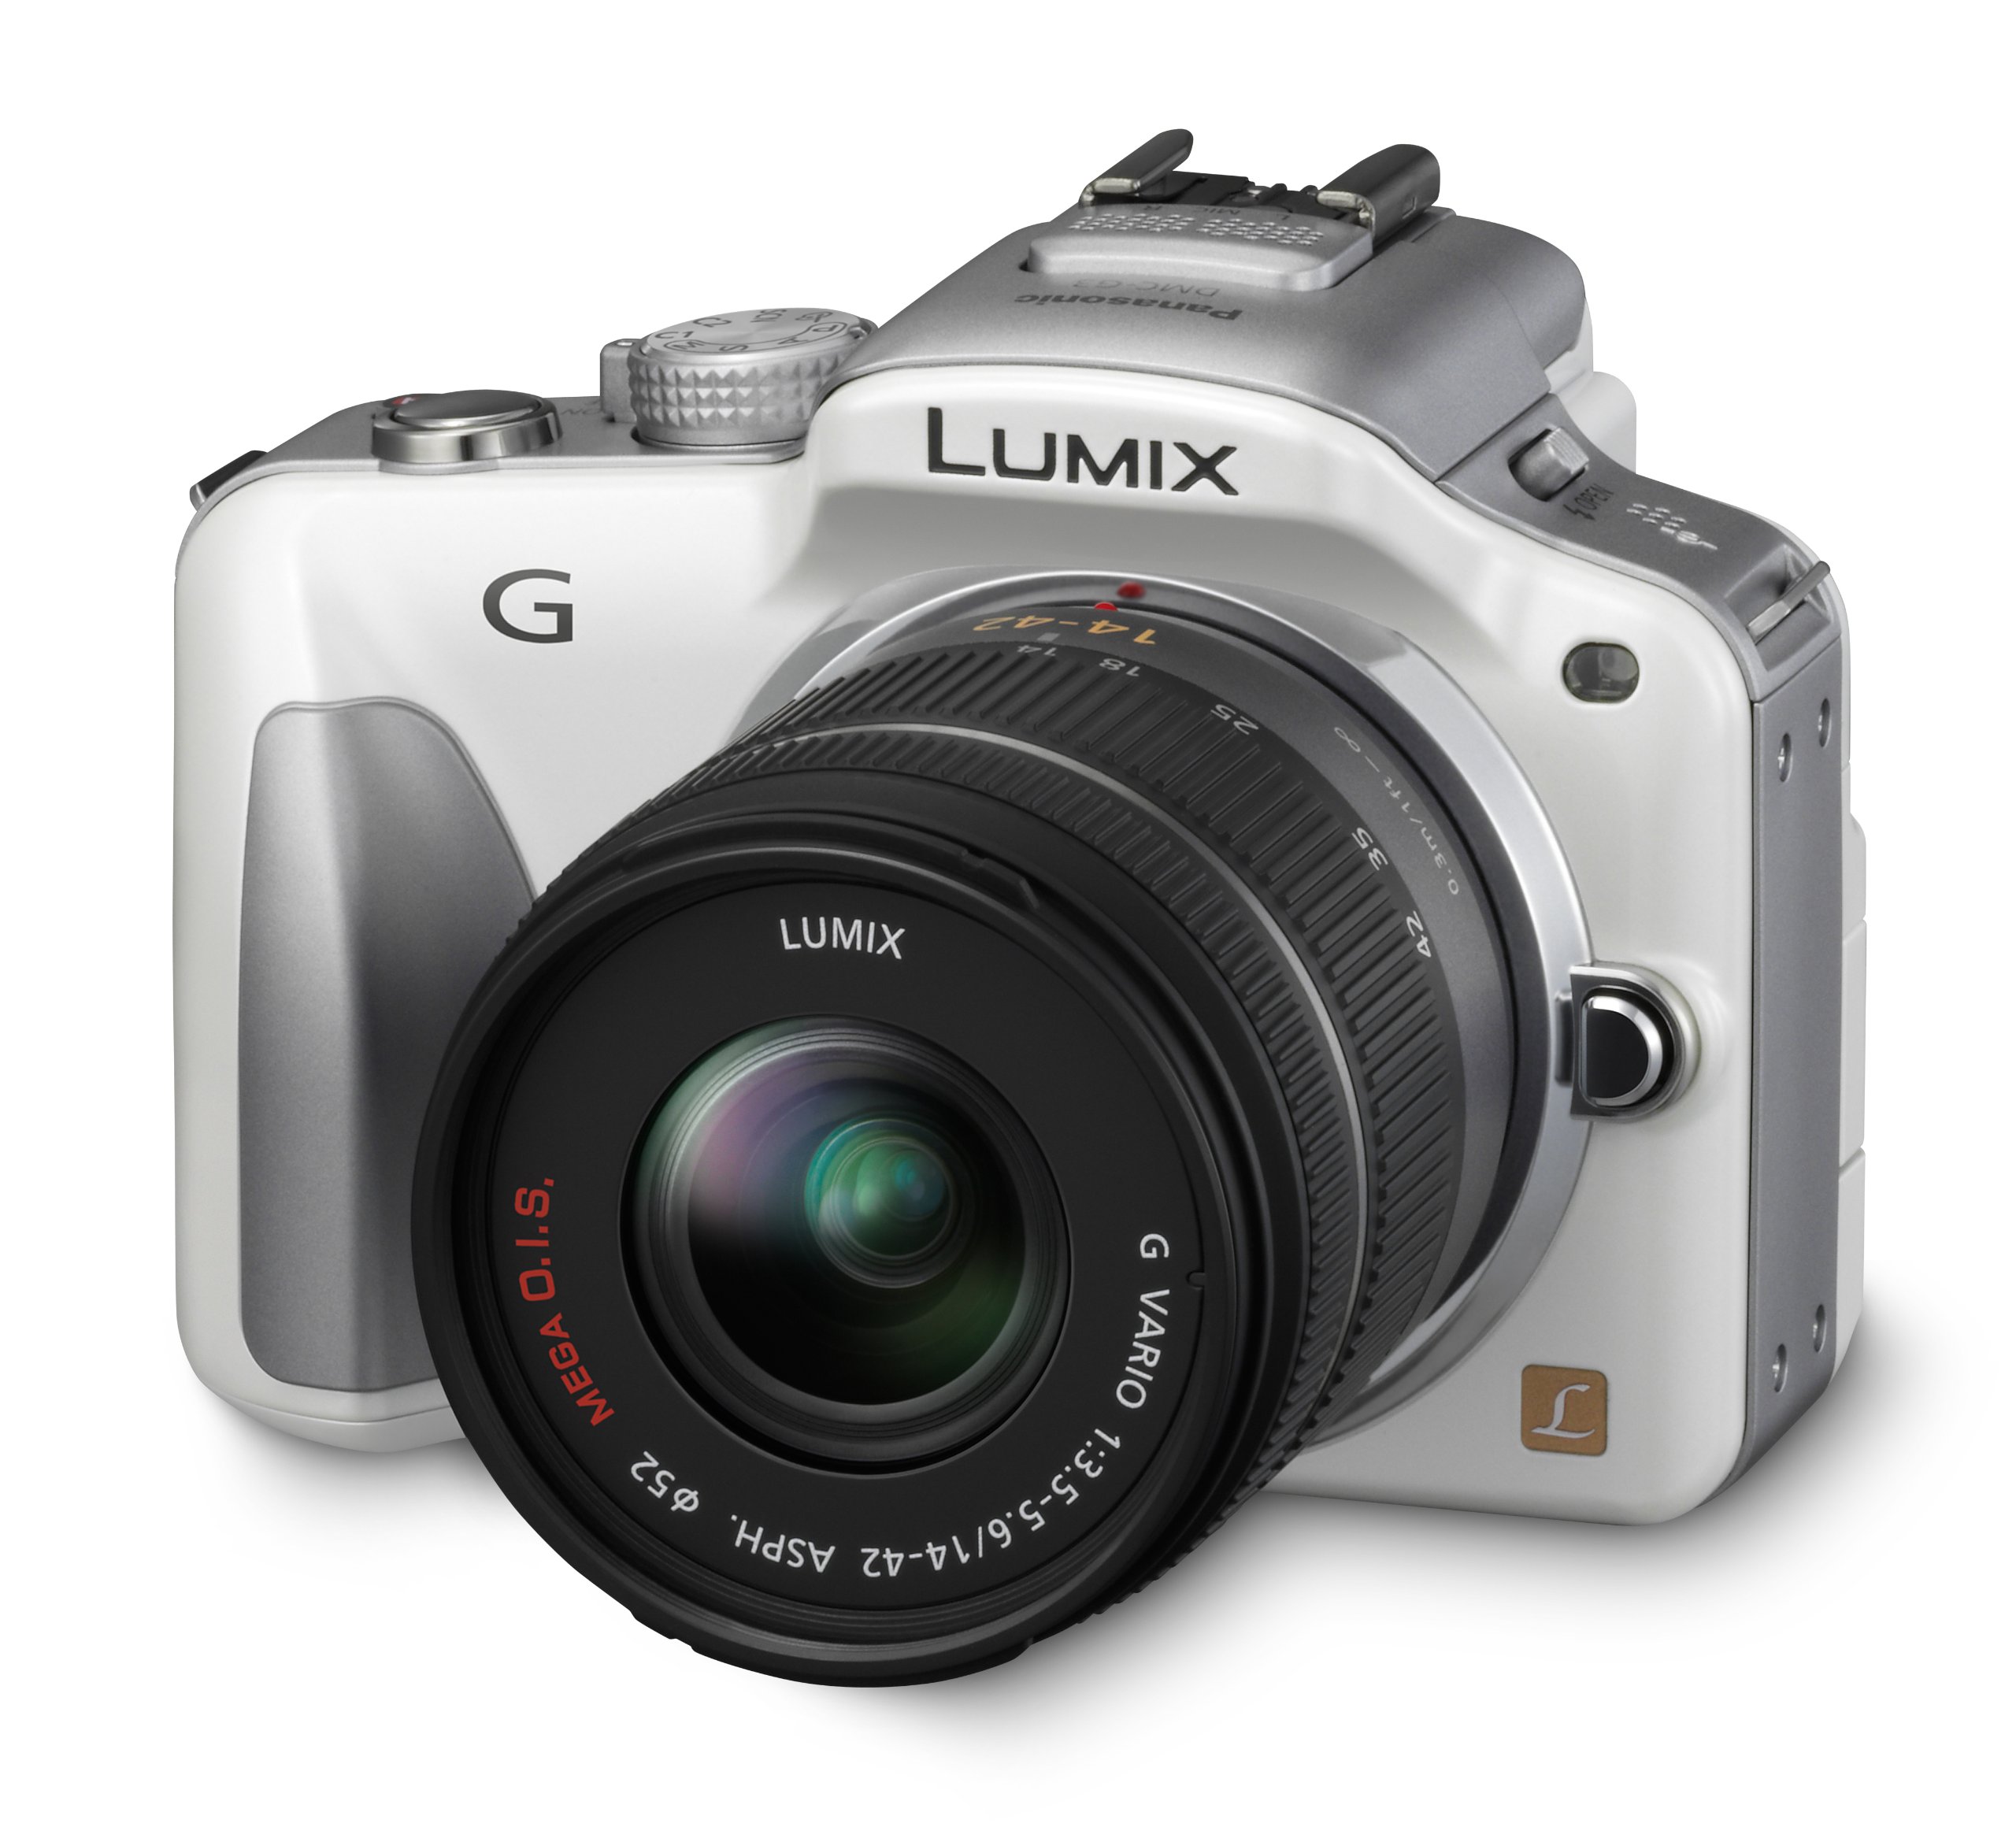 Panasonic LUMIX DMC-G3 16 MP Micro Four-Thirds Interchangeable Lens Camera with 3-Inch Free-Angle Touch-Screen LCD and 14-42mm Lumix G VARIO f/3.5-5.6 Lens